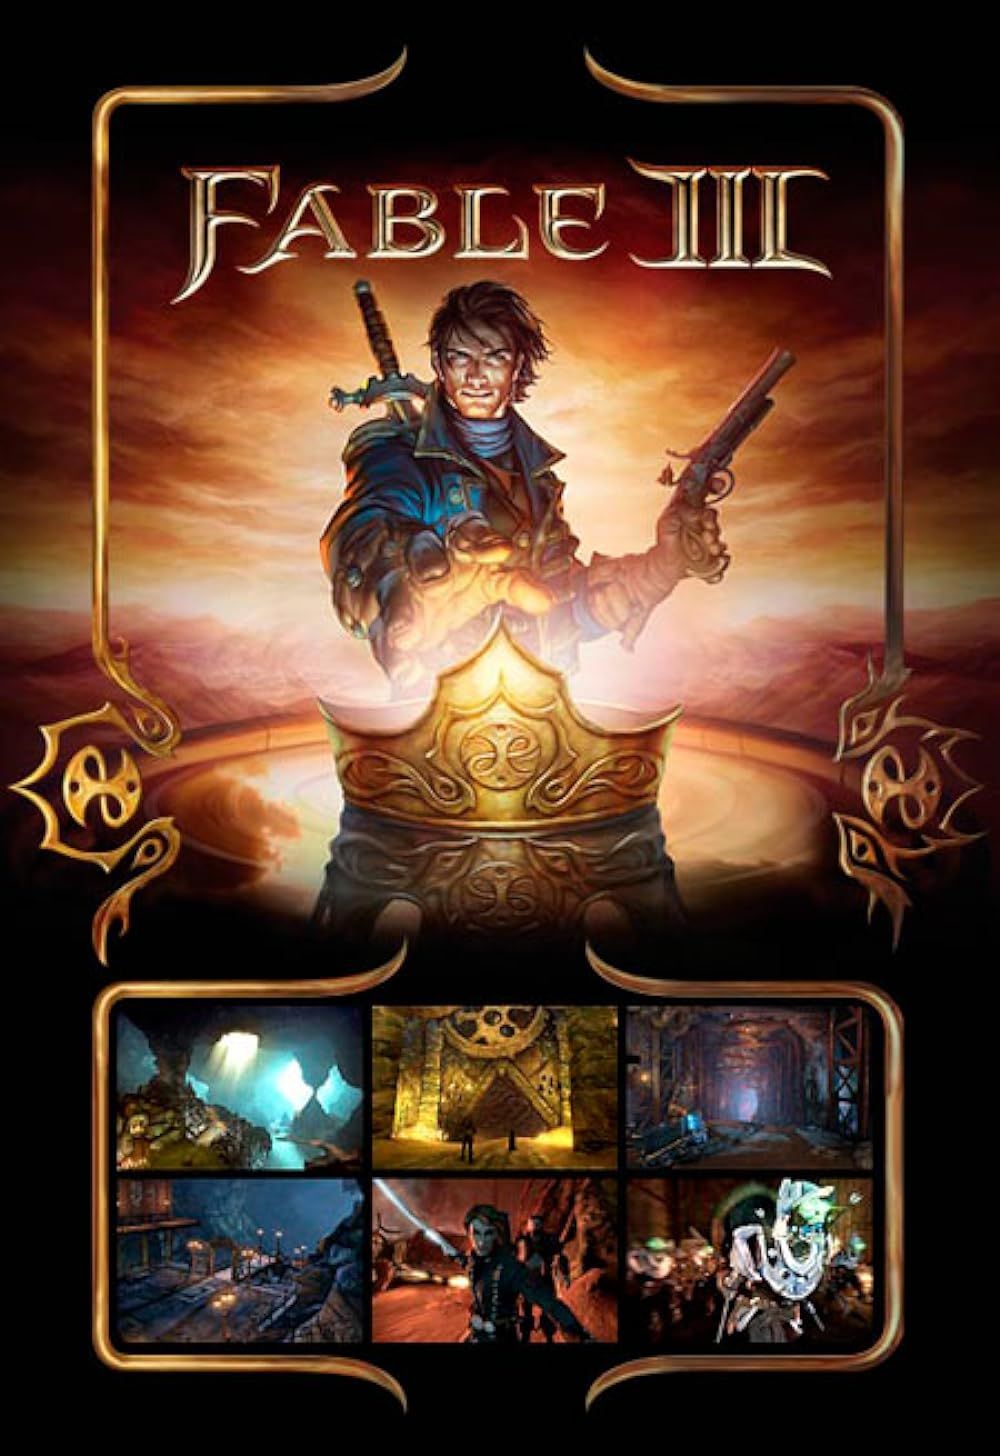 Fable III video game poster